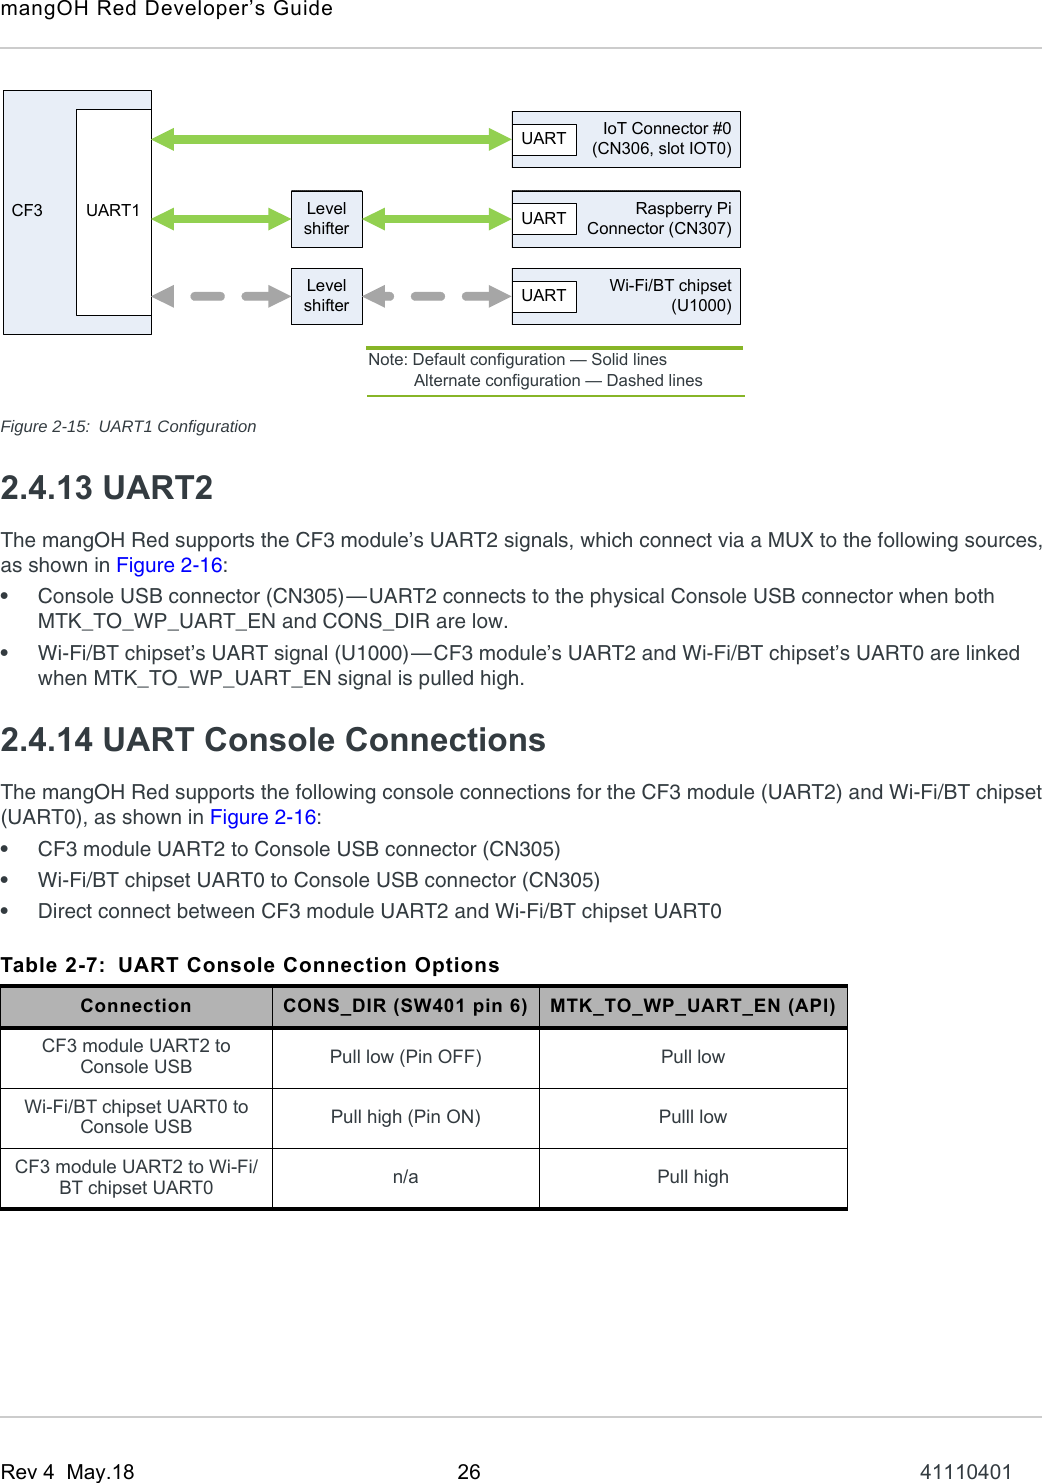 mangOH Red Developer’s GuideRev 4  May.18 26 41110401Figure 2-15: UART1 Configuration2.4.13 UART2The mangOH Red supports the CF3 module’s UART2 signals, which connect via a MUX to the following sources, as shown in Figure 2-16:•Console USB connector (CN305)—UART2 connects to the physical Console USB connector when both MTK_TO_WP_UART_EN and CONS_DIR are low.•Wi-Fi/BT chipset’s UART signal (U1000)—CF3 module’s UART2 and Wi-Fi/BT chipset’s UART0 are linked when MTK_TO_WP_UART_EN signal is pulled high.2.4.14 UART Console ConnectionsThe mangOH Red supports the following console connections for the CF3 module (UART2) and Wi-Fi/BT chipset (UART0), as shown in Figure 2-16:•CF3 module UART2 to Console USB connector (CN305)•Wi-Fi/BT chipset UART0 to Console USB connector (CN305)•Direct connect between CF3 module UART2 and Wi-Fi/BT chipset UART0Table 2-7: UART Console Connection OptionsConnection CONS_DIR (SW401 pin 6) MTK_TO_WP_UART_EN (API)CF3 module UART2 to Console USB Pull low (Pin OFF) Pull lowWi-Fi/BT chipset UART0 to Console USB Pull high (Pin ON) Pulll lowCF3 module UART2 to Wi-Fi/BT chipset UART0 n/a Pull highCF3 UART1IoT Connector #0(CN306, slot IOT0)UARTRaspberry PiConnector (CN307)UARTLevelshifterWi-Fi/BT chipset(U1000)UARTLevelshifterNote: Default configuration — Solid lines          Alternate configuration — Dashed lines